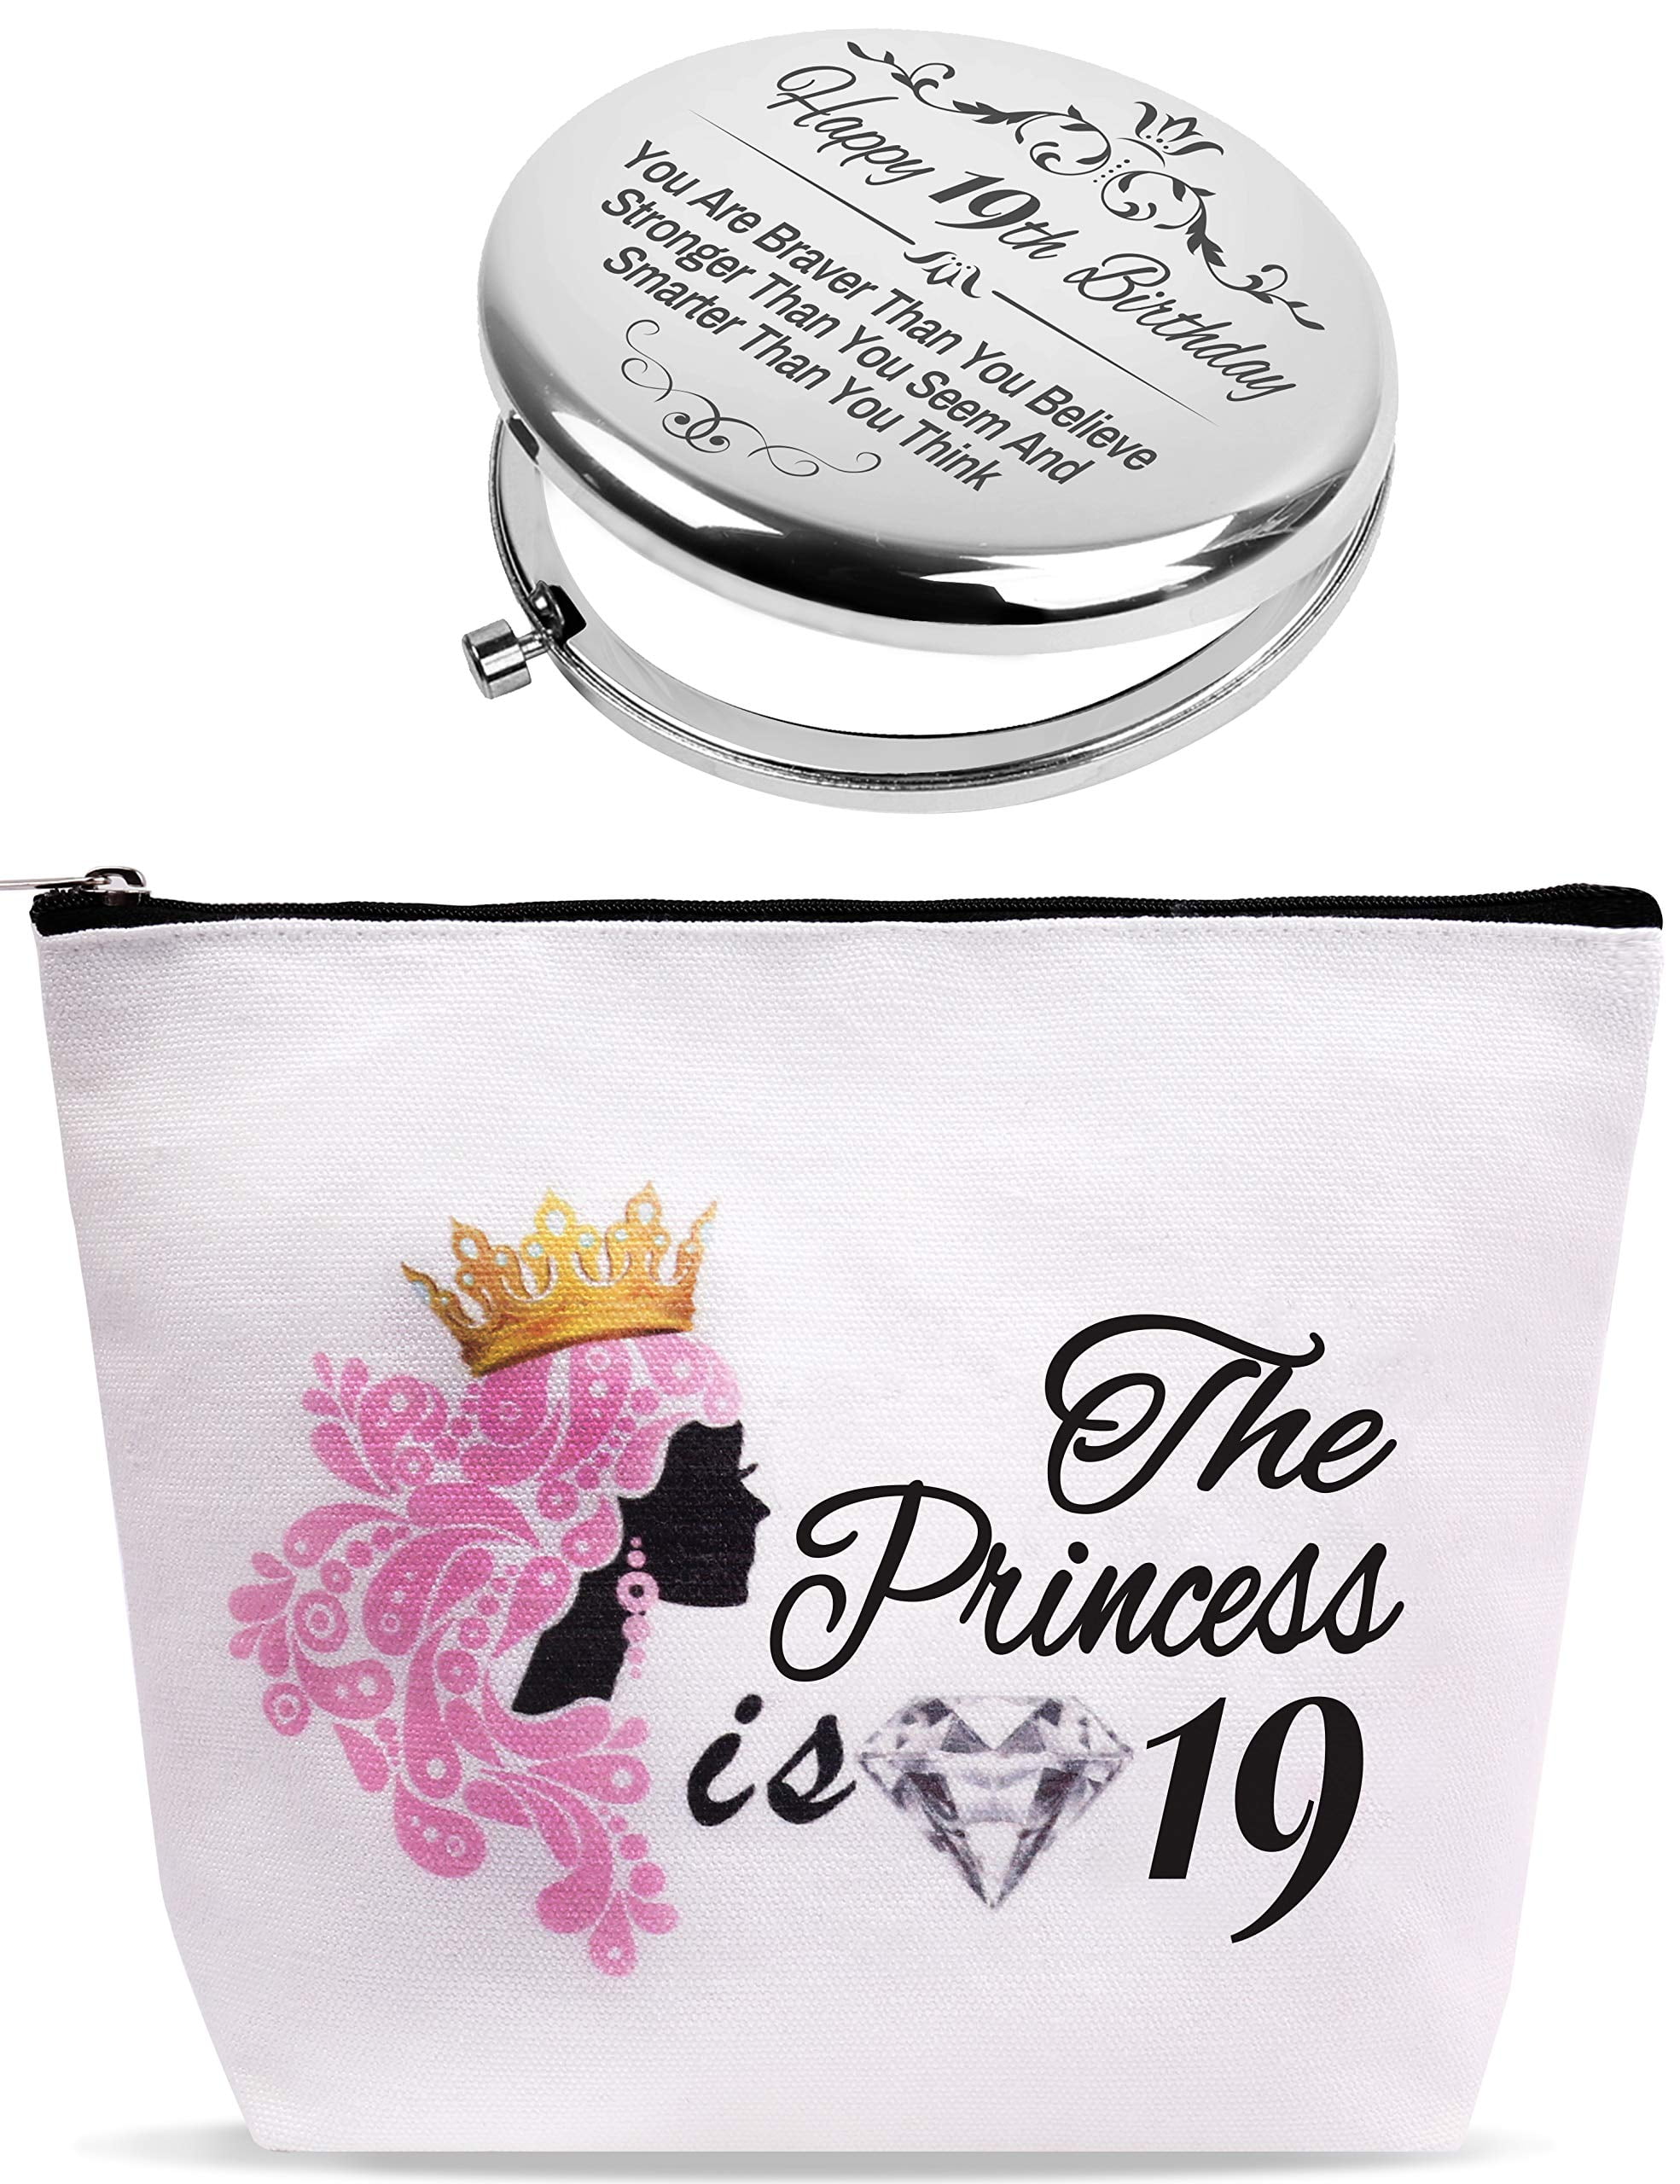 Wenboco 19th Birthday Decorations Gifts for 19 Year Old Female Makeup Bag  Happy 19th Birthday Gifts Ideas Gift for Girls Daughter Sisters Friends